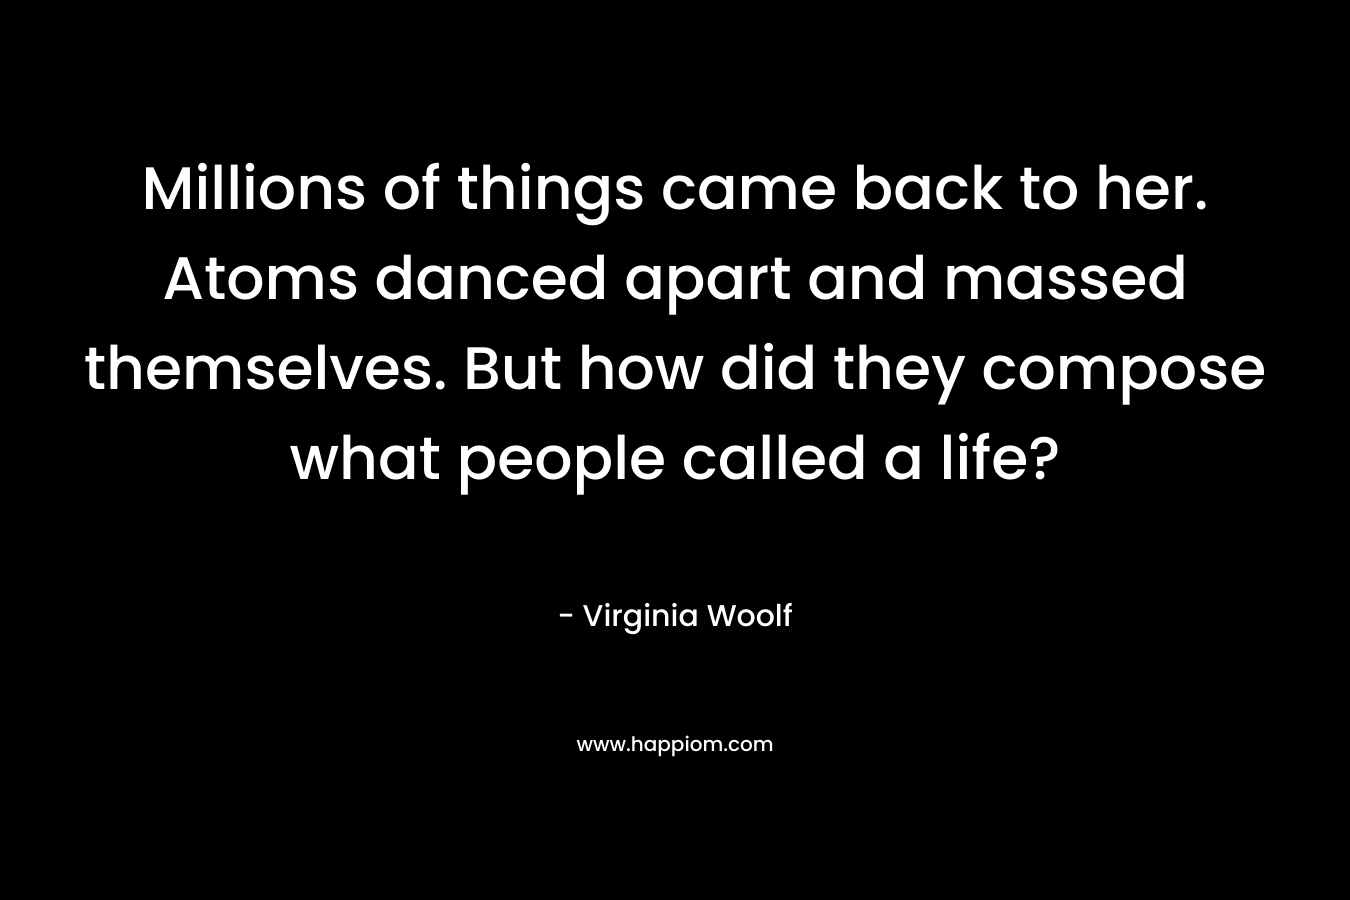 Millions of things came back to her. Atoms danced apart and massed themselves. But how did they compose what people called a life? – Virginia Woolf